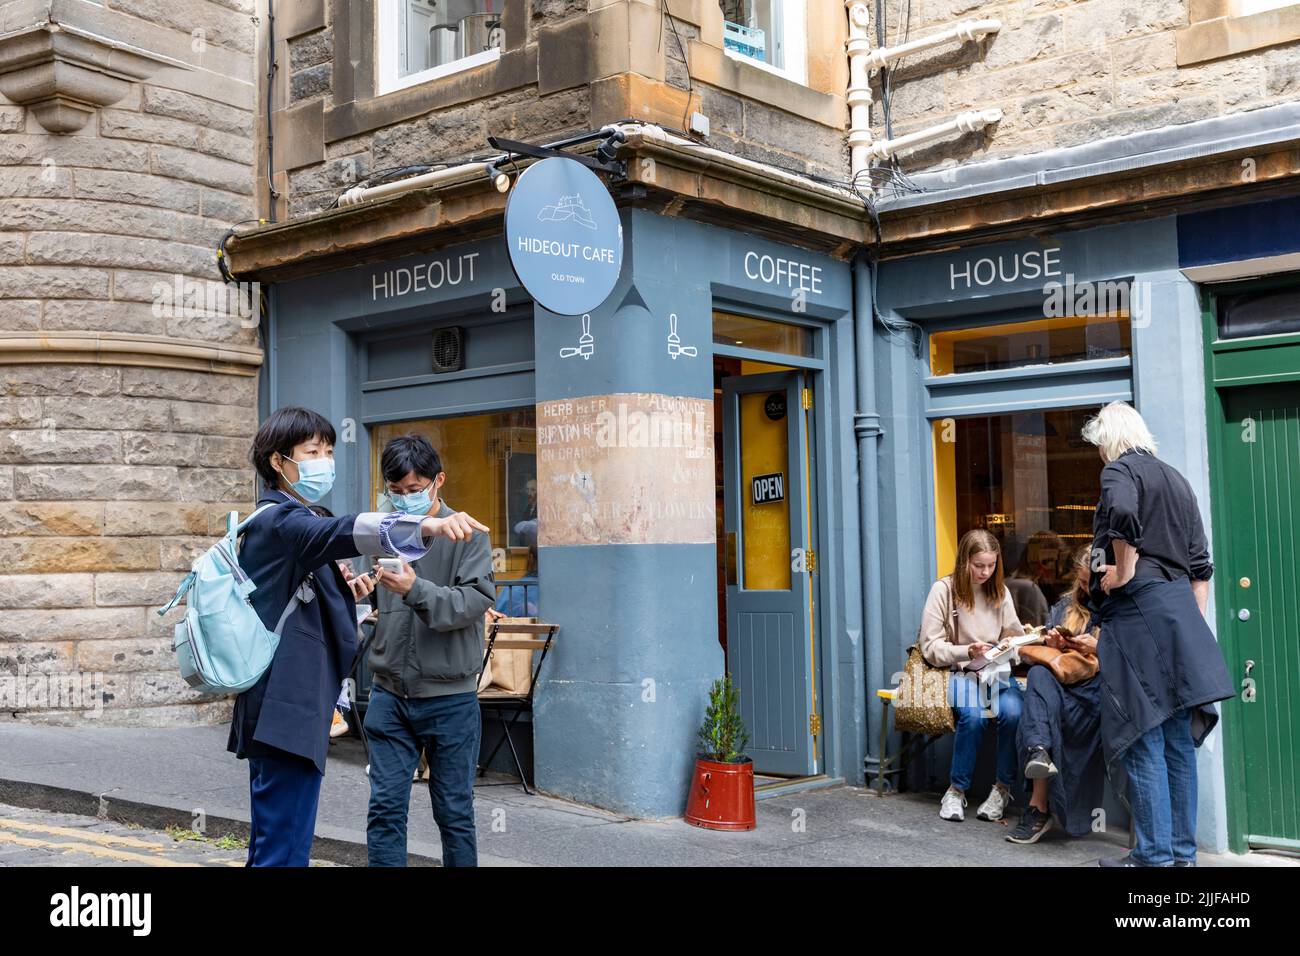 Hideout cafe coffee shop in upper bow, people wait for coffees, facemasks due to covid 19,Edinburgh old town,Scotland,UK summer 2022 Stock Photo